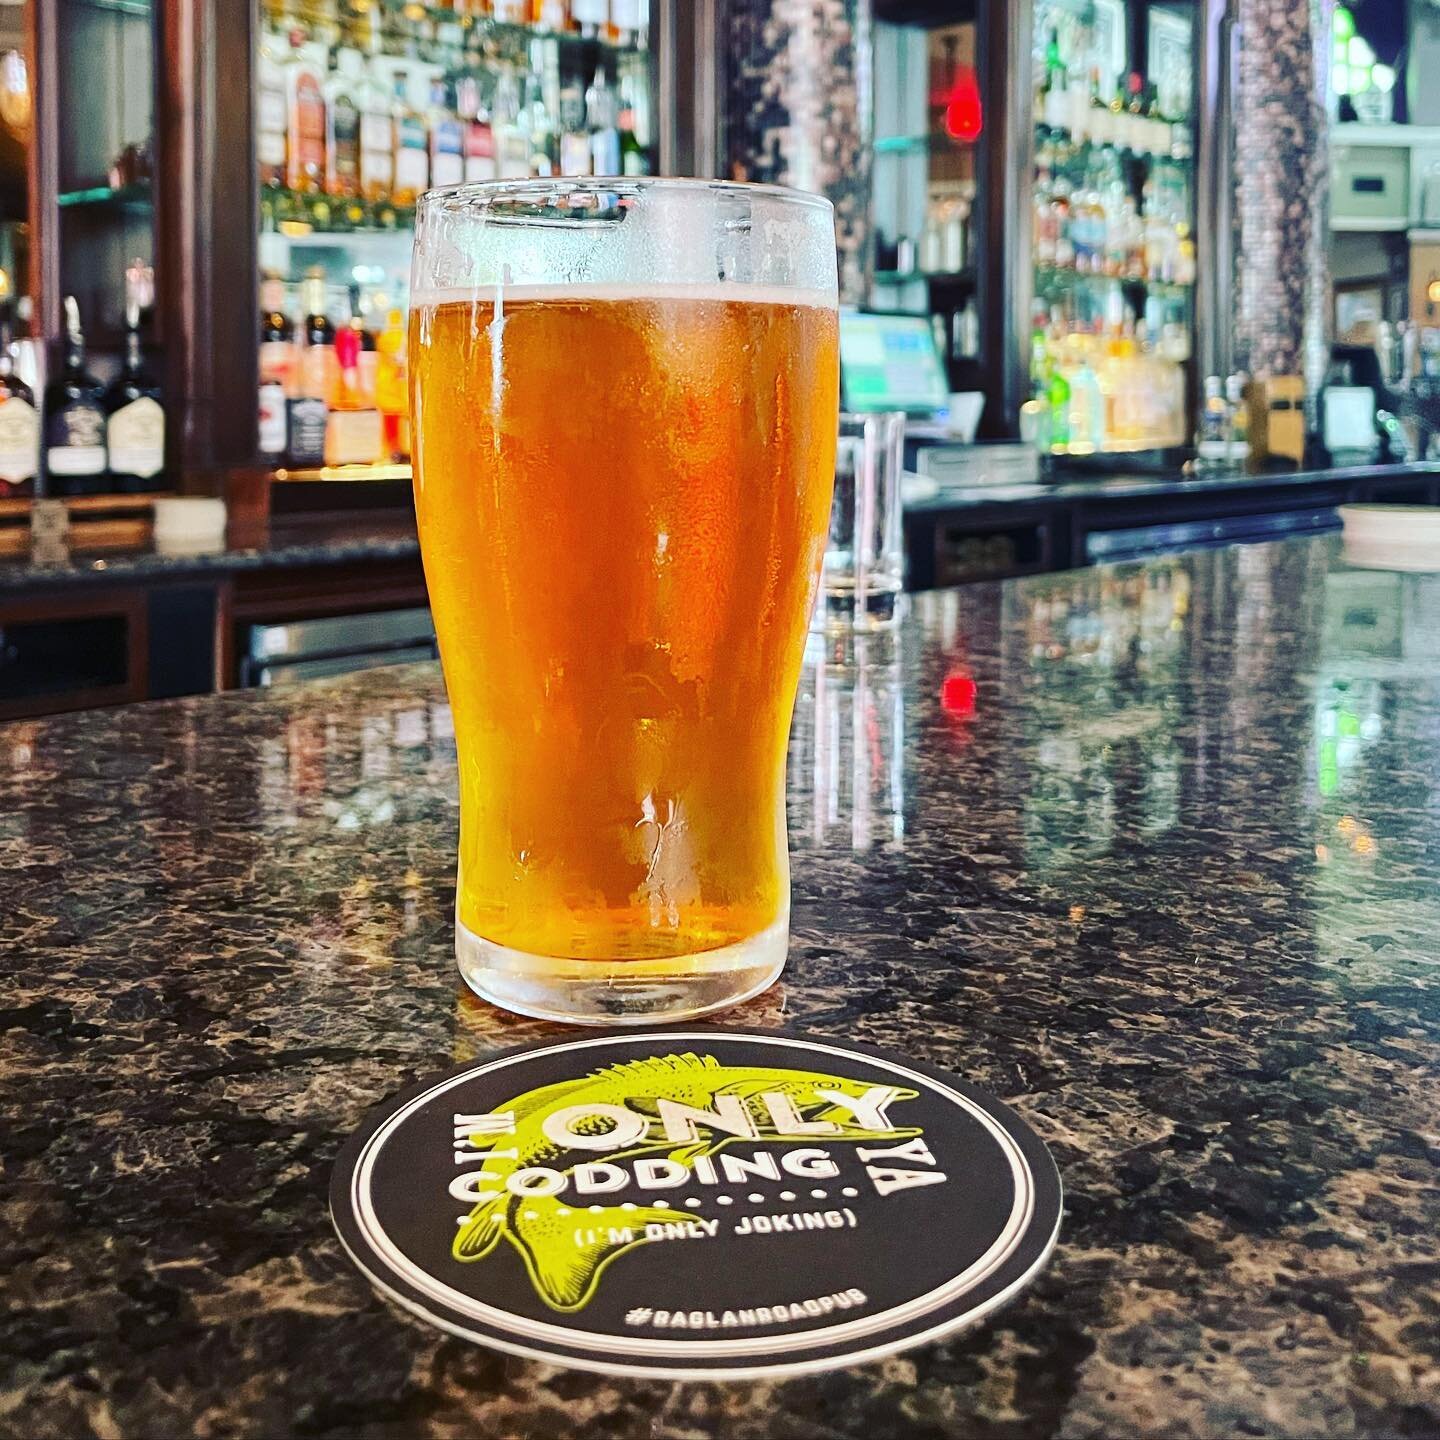 It's a good day to be indoors with a nice pint of our Bloomsday at @raglanroadpub 😁🍻🧡
.
📷: @dro1030 #orlandobeer #bloomsday #orangeblossombrewing #floridabeer #orlandobeer
.
.
.
As always, if you can't make it in, you can always locate our beer a